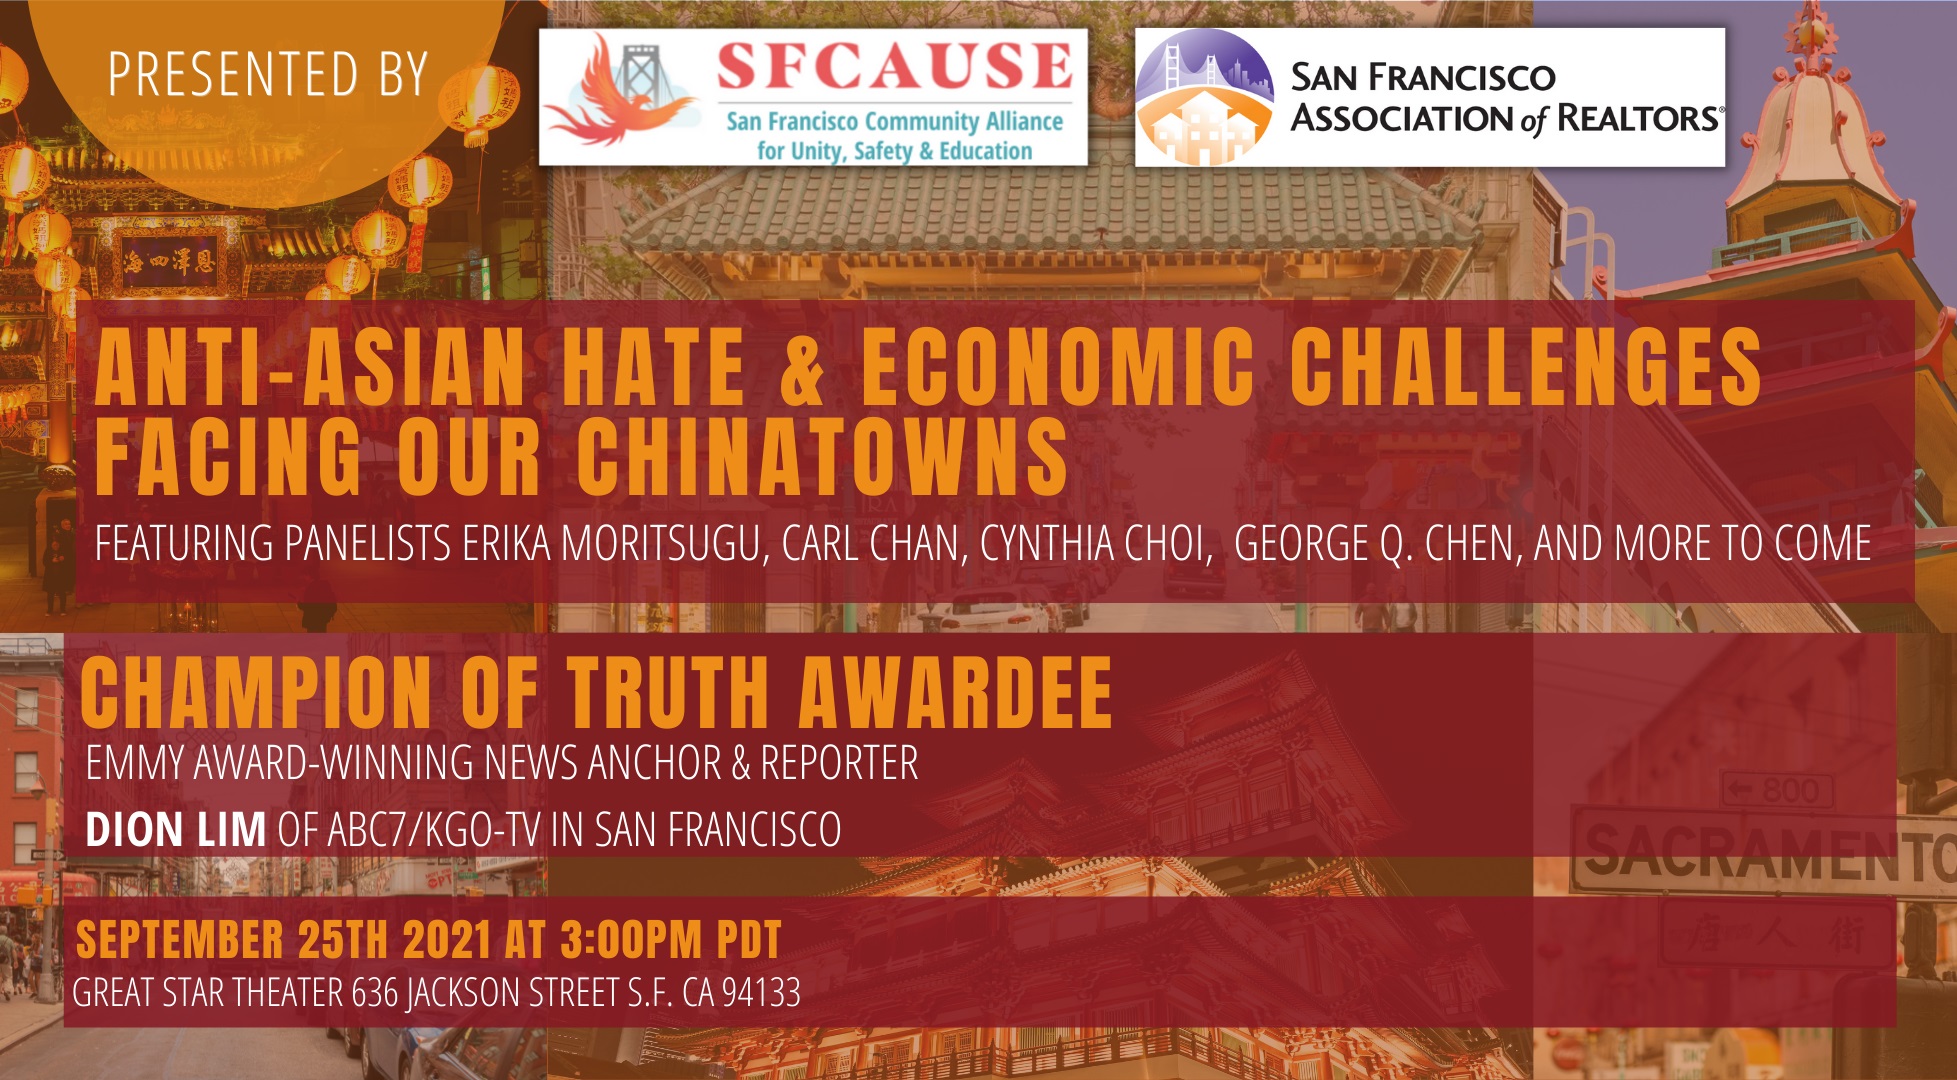 SFCAUSE panel on Anti-Asian Hate & Economic Challenges